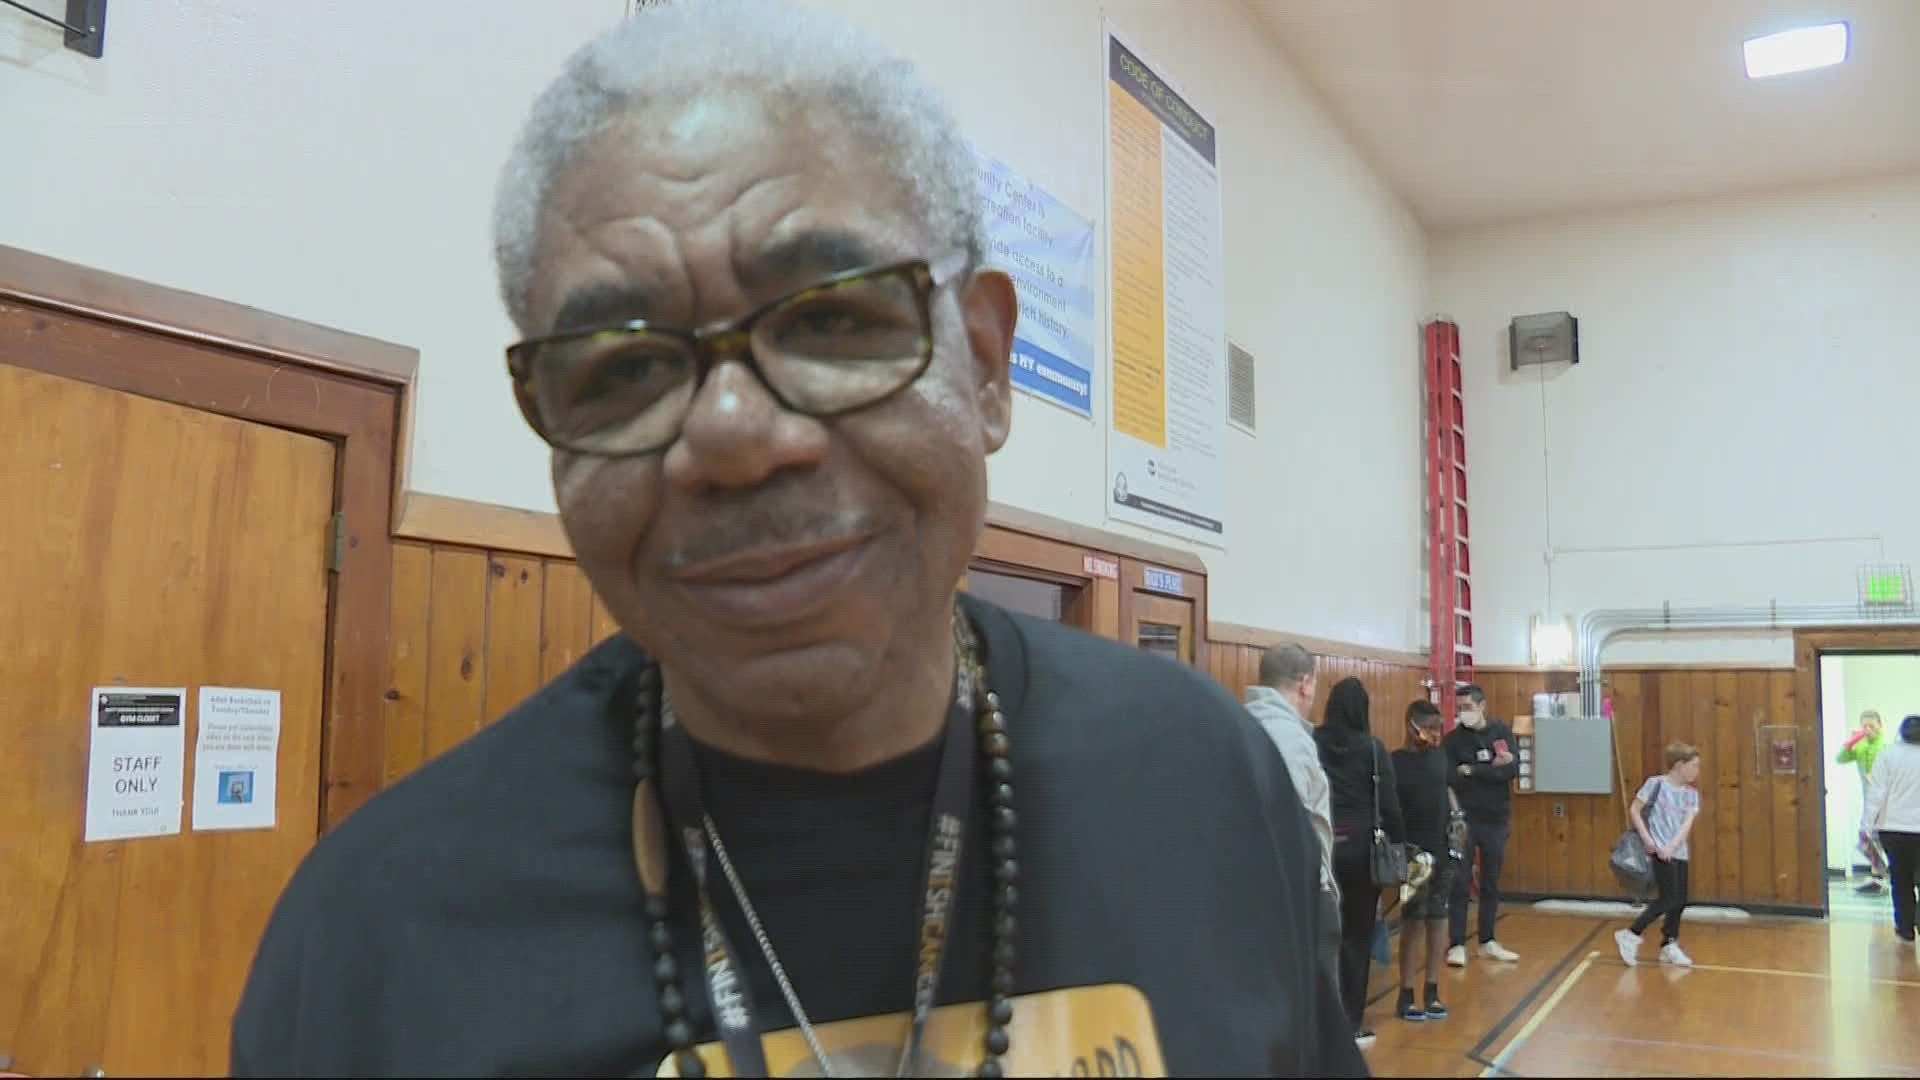 Earl Chaney has been coaching basketball in Portland for more than 40 years, but a recent heart attack and complications threaten to take him out of the game.